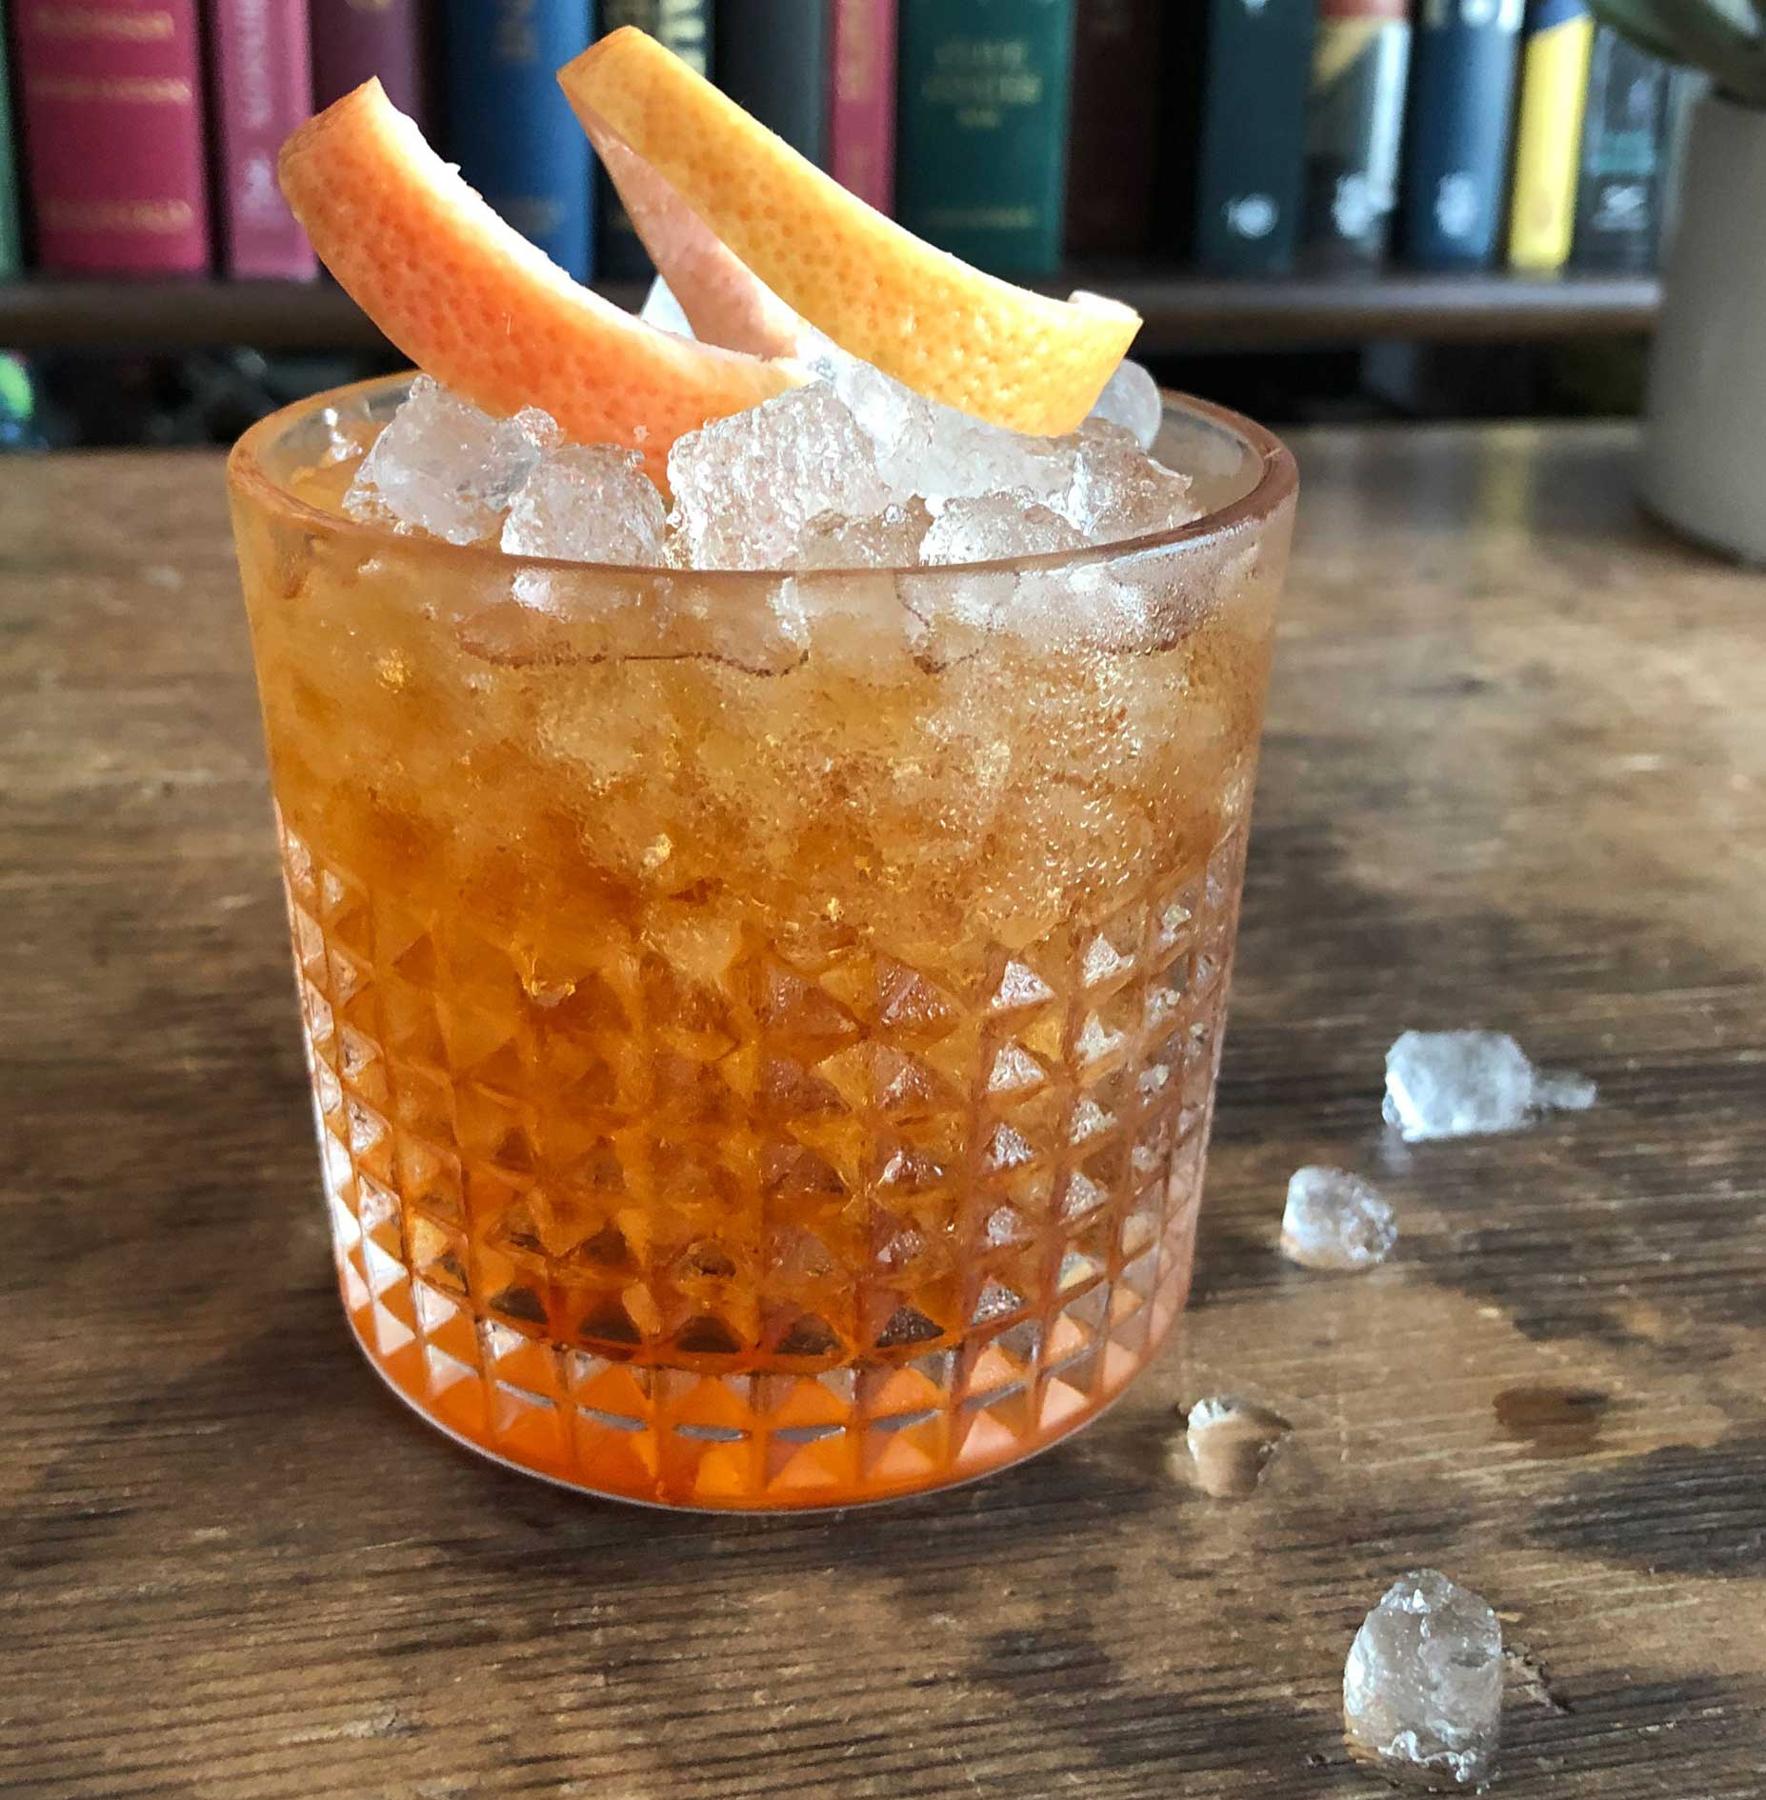 An example of the Savage Love, the mixed drink (drink), by Jesse Harris, Leyenda, Brooklyn, featuring cava, Amaro di Angostura, Aperitivo Cappelletti, Cocchi Vermouth di Torino ‘Storico’, Salers Gentian Apéritif, and grapefruit twist; photo by Lee Edwards